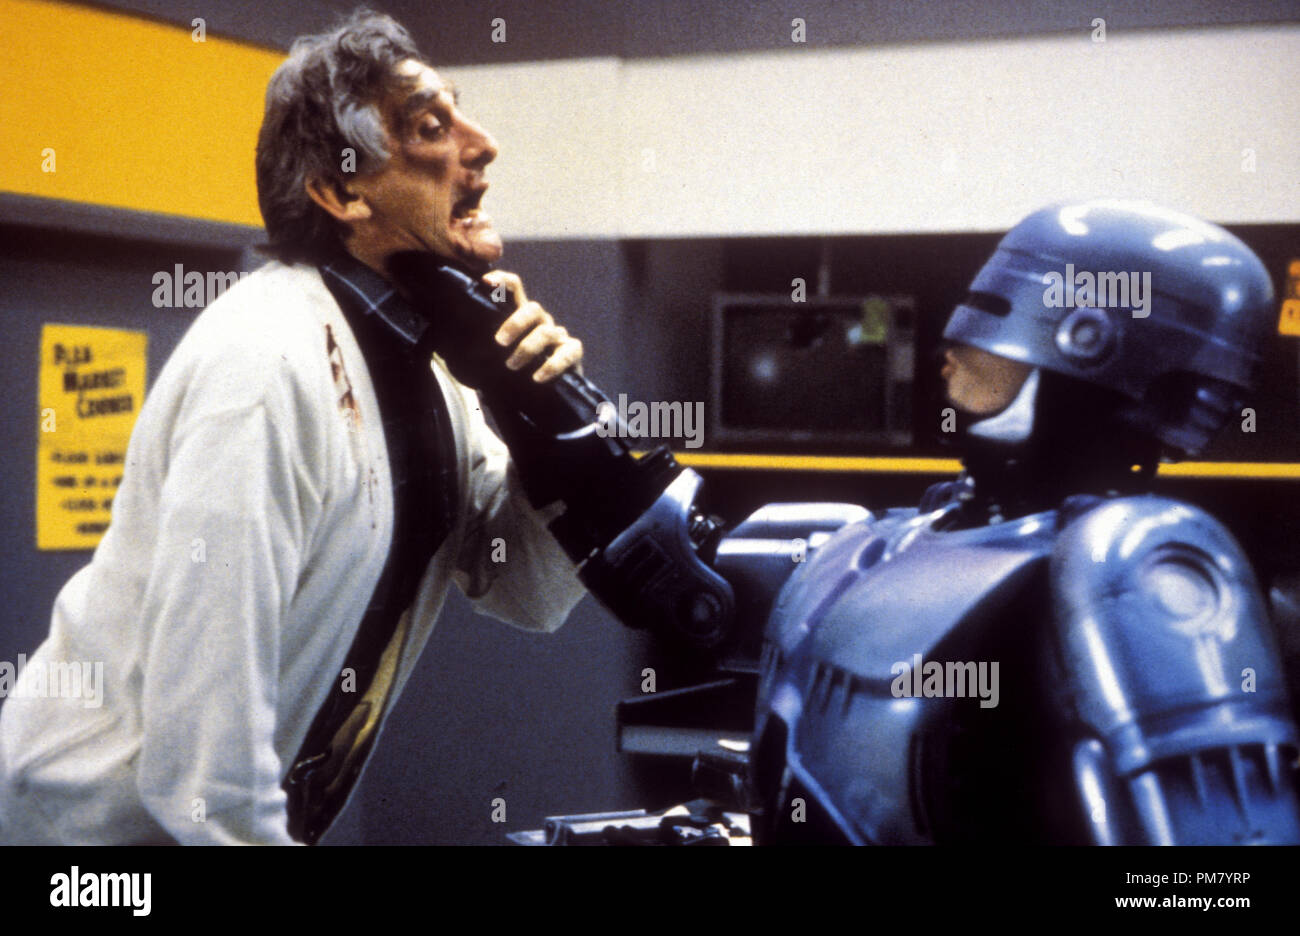 Film still or Publicity still from 'Robocop 2' Peter Weller © 1990 Orion All Rights Reserved   File Reference # 31571100THA  For Editorial Use Only Stock Photo